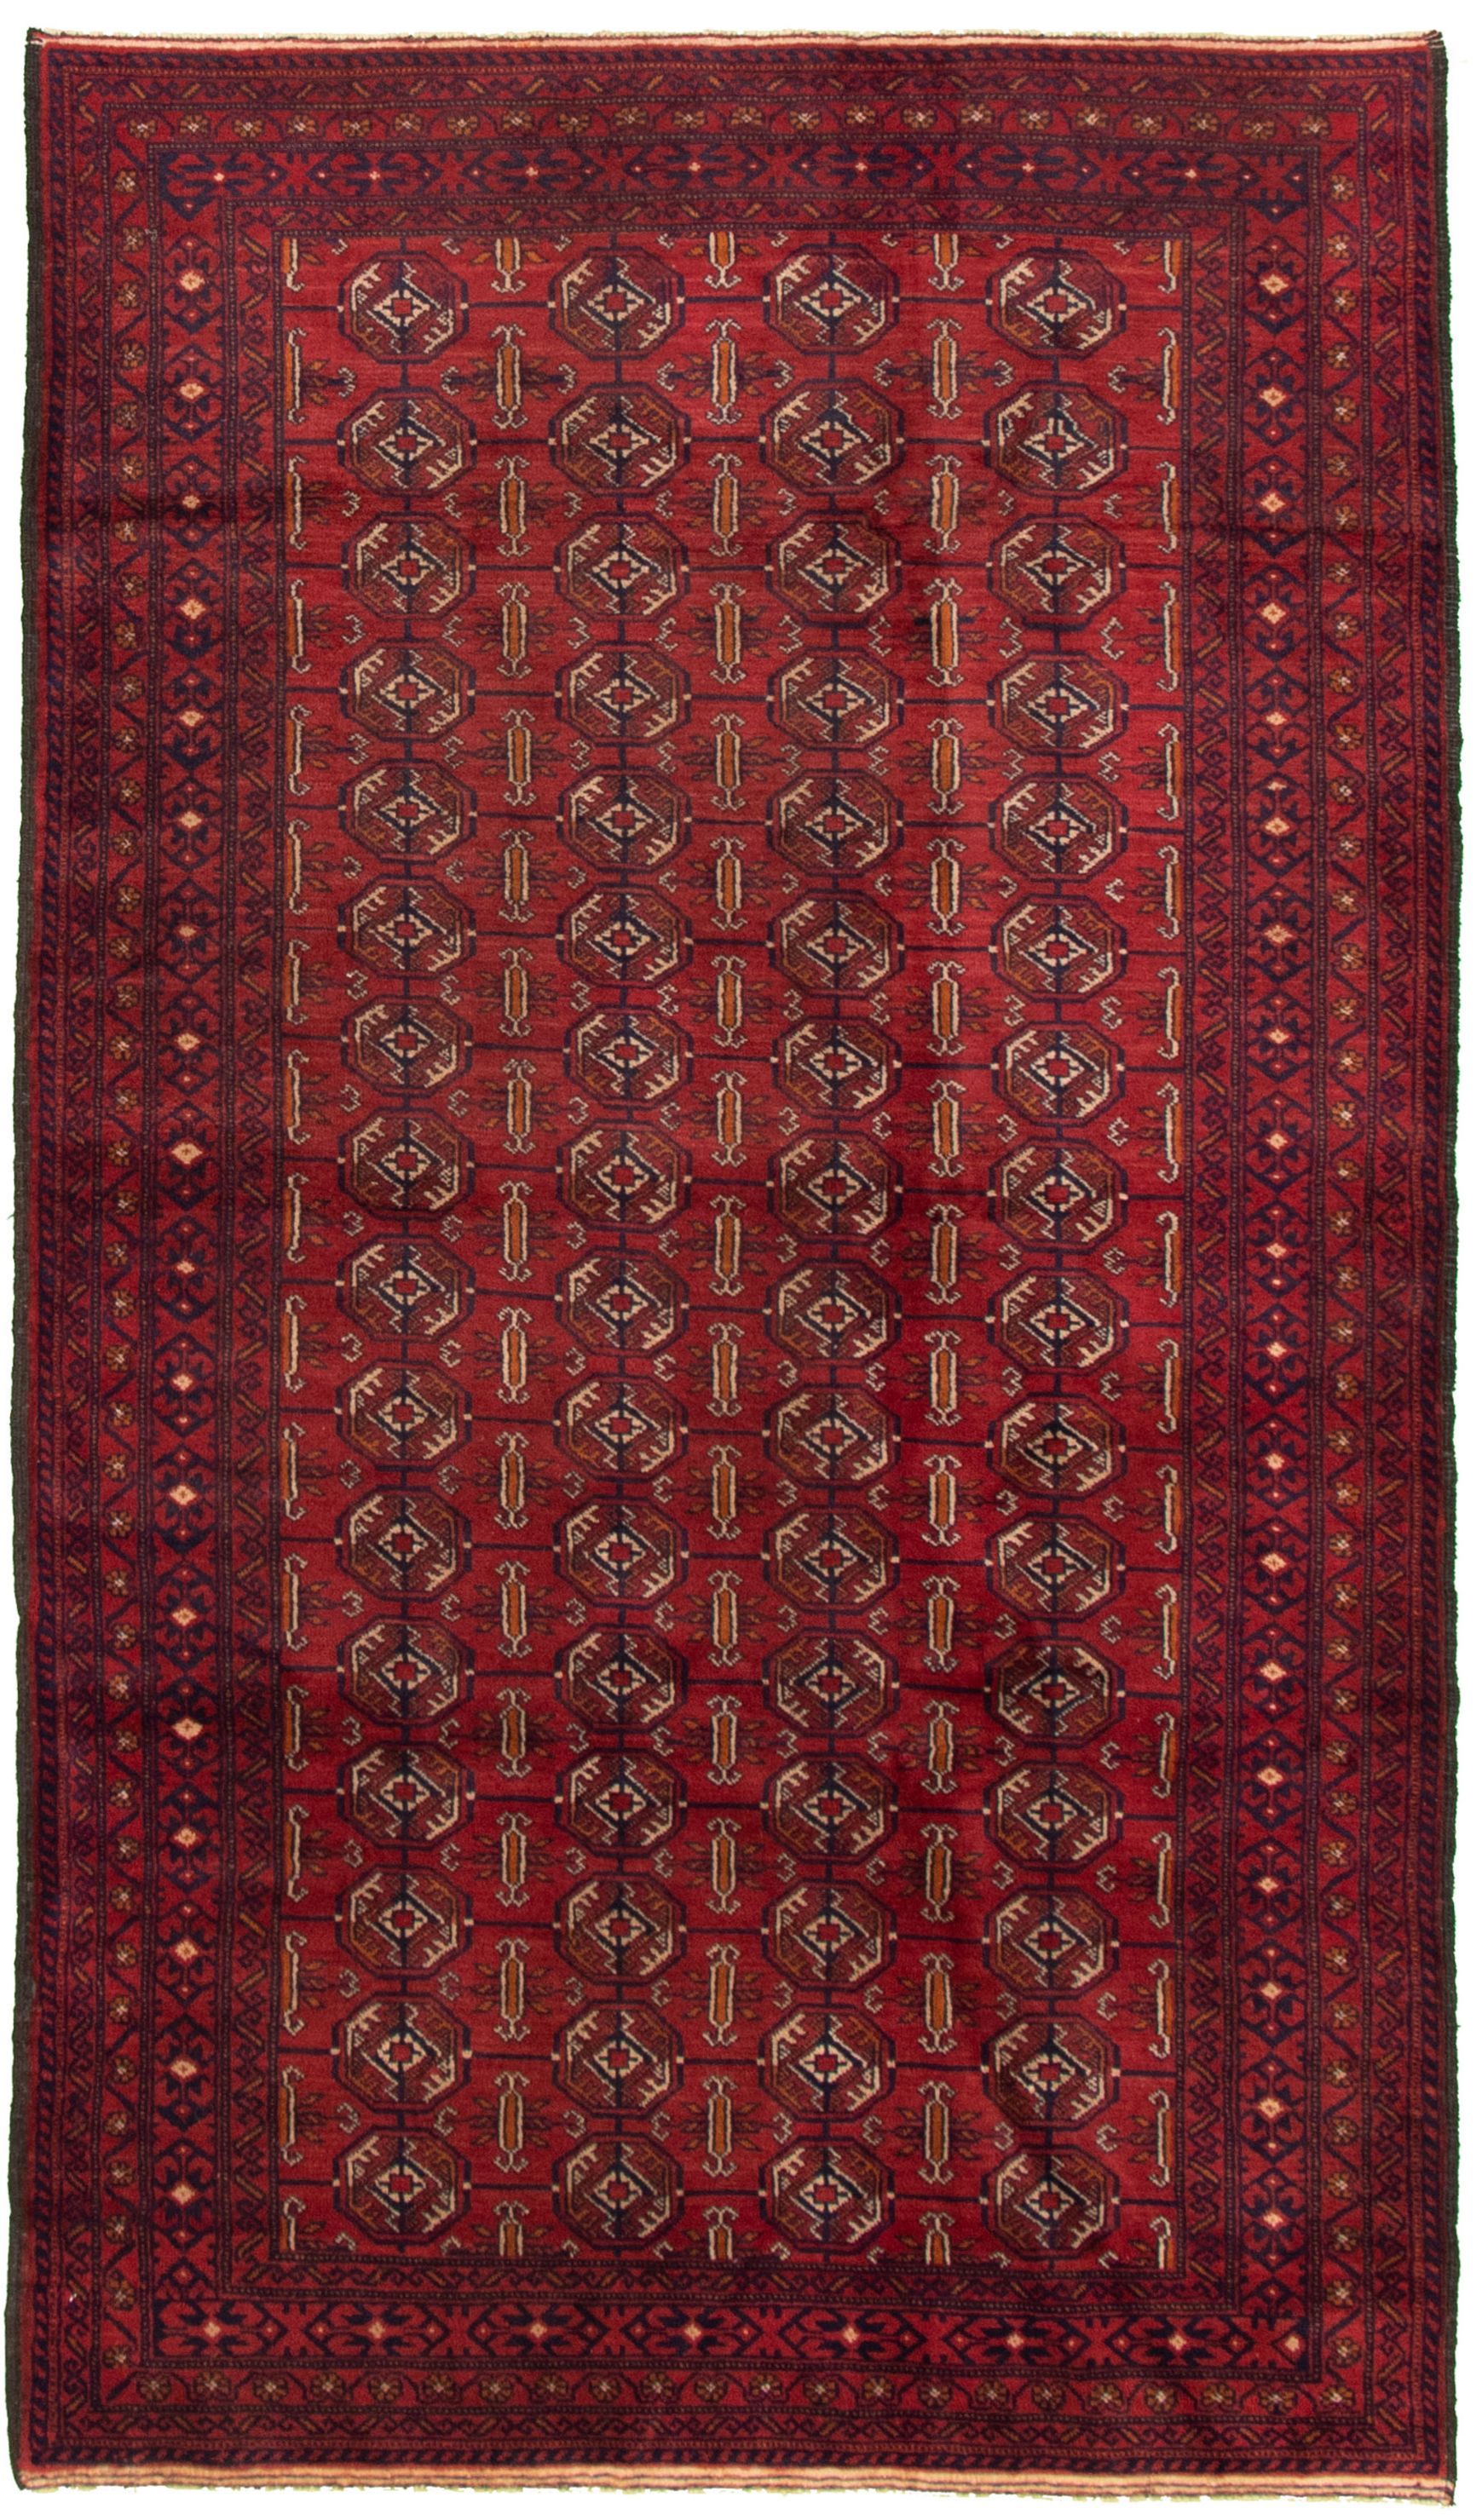 Hand-knotted Teimani Red Wool Rug 4'5" x 8'4" Size: 4'5" x 8'4"  